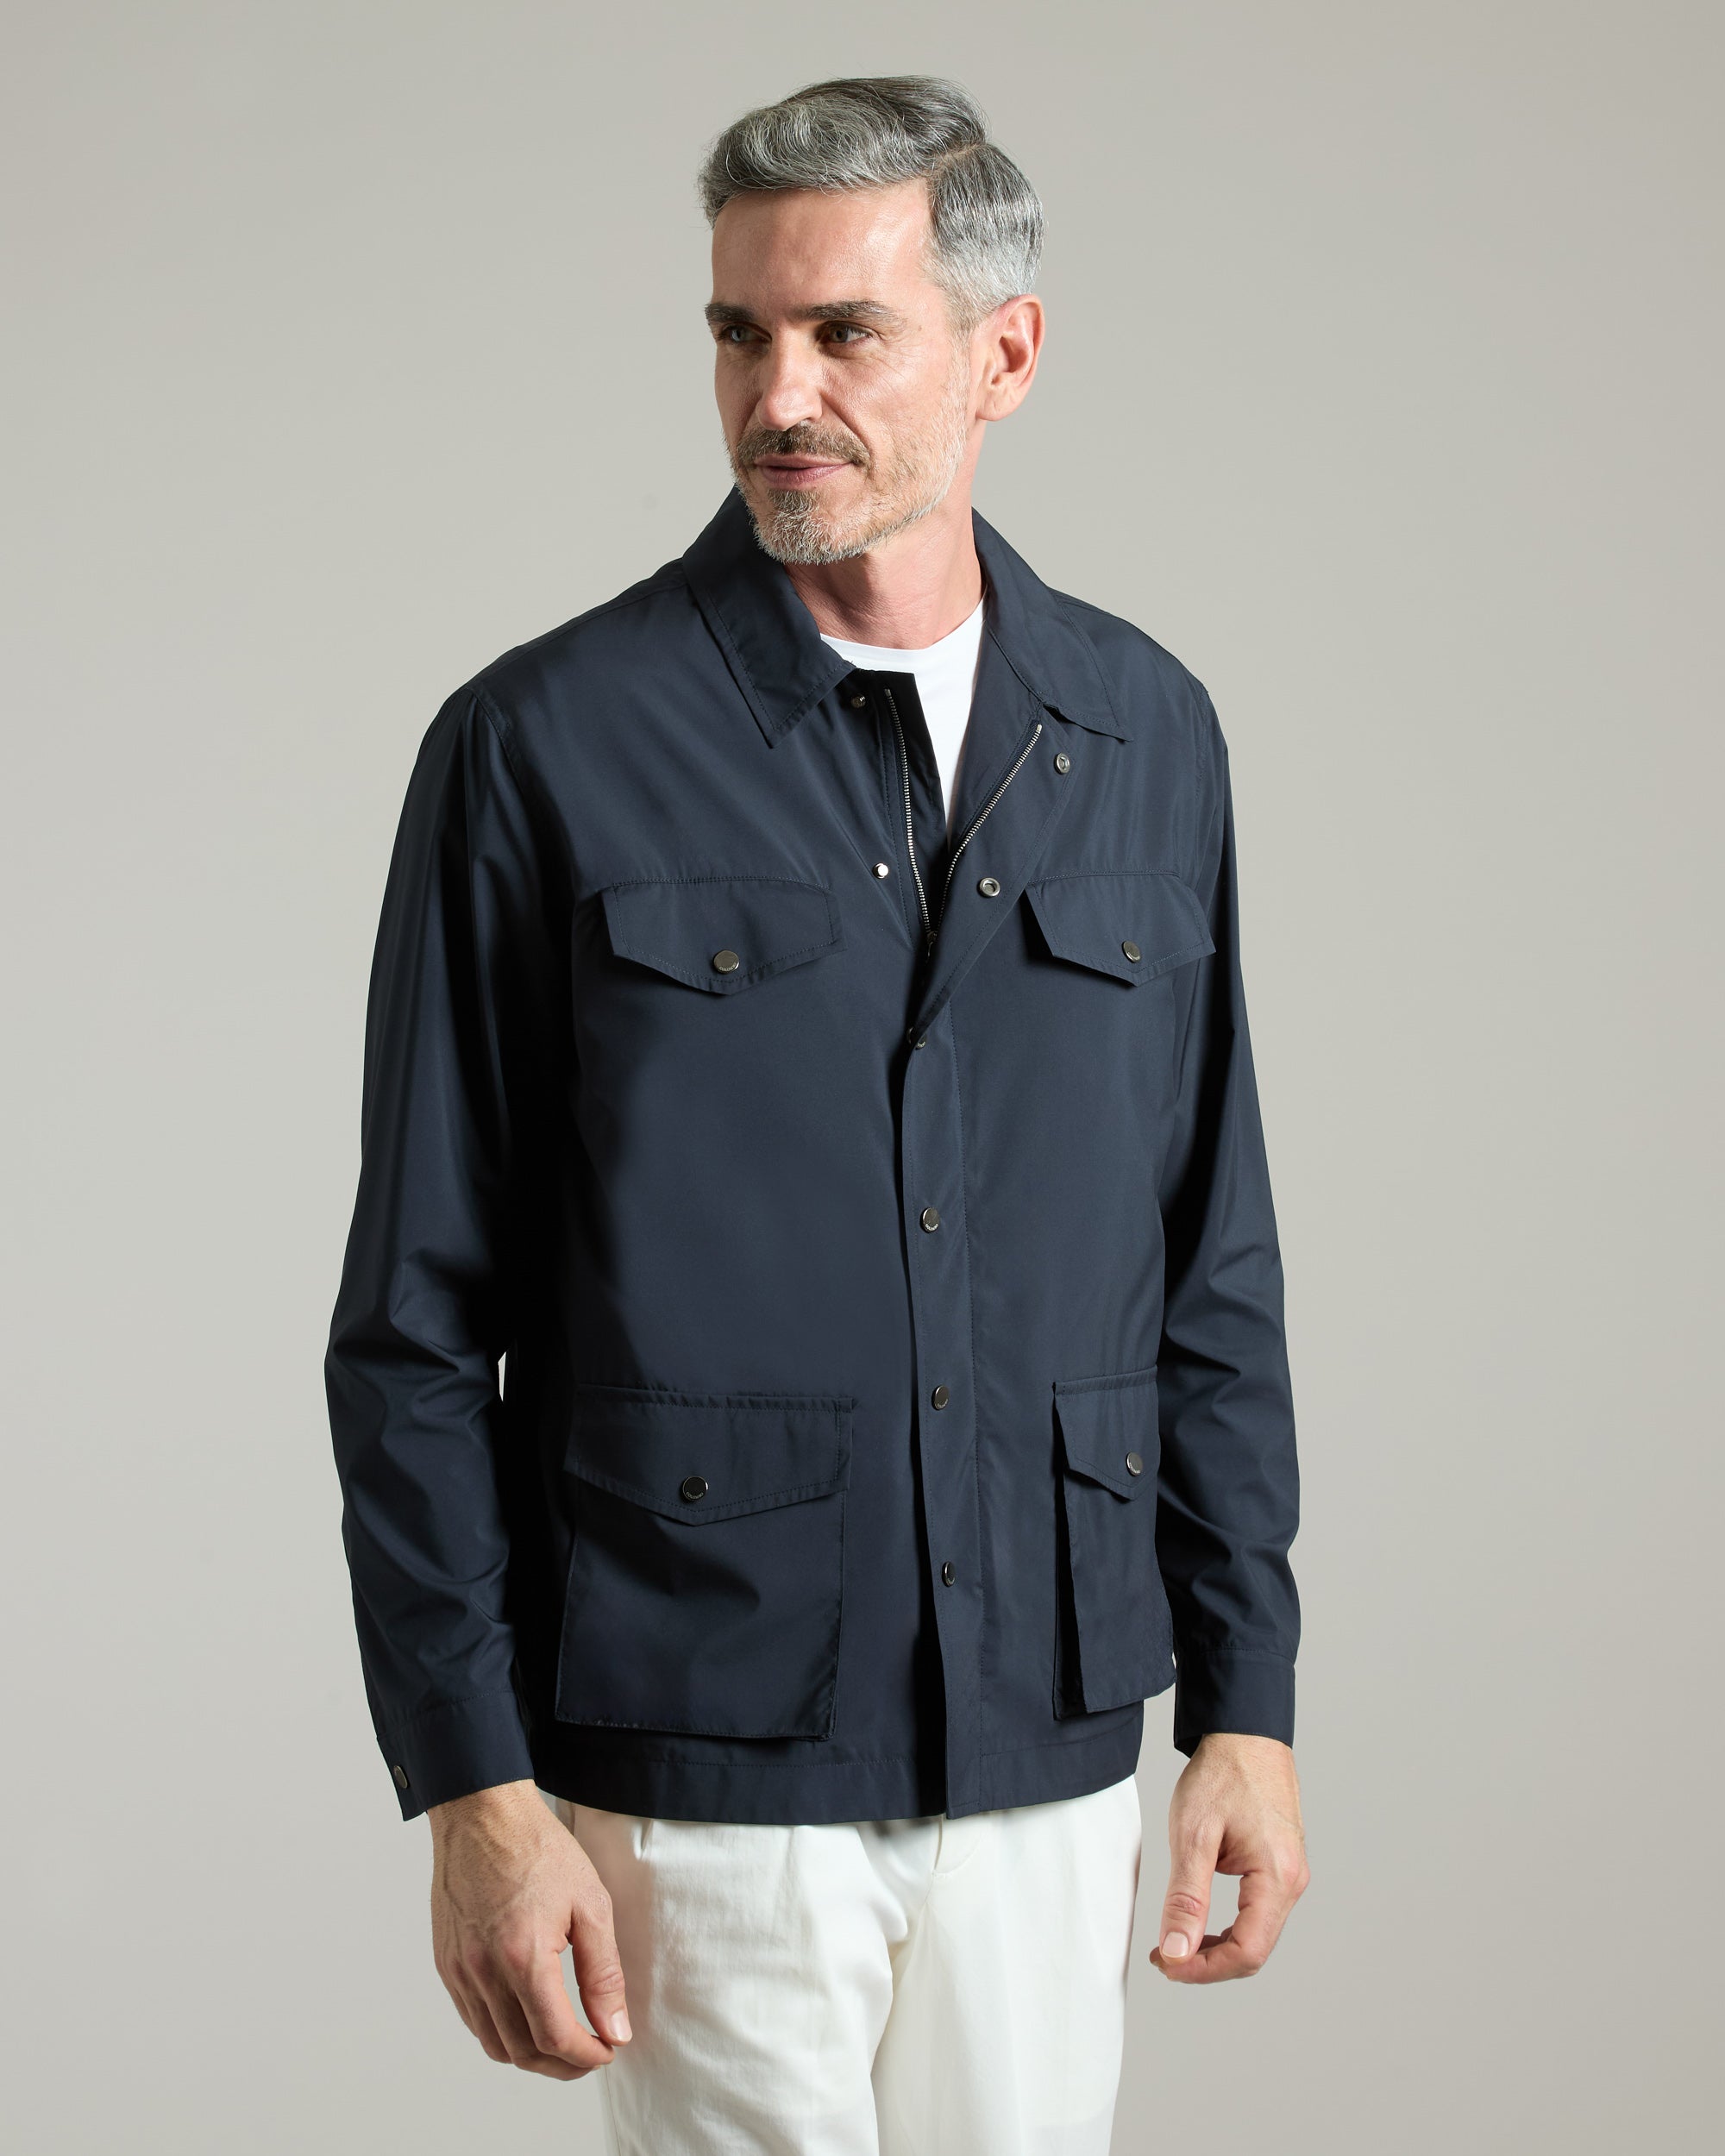 Outerwear 20 KNOTS in navy